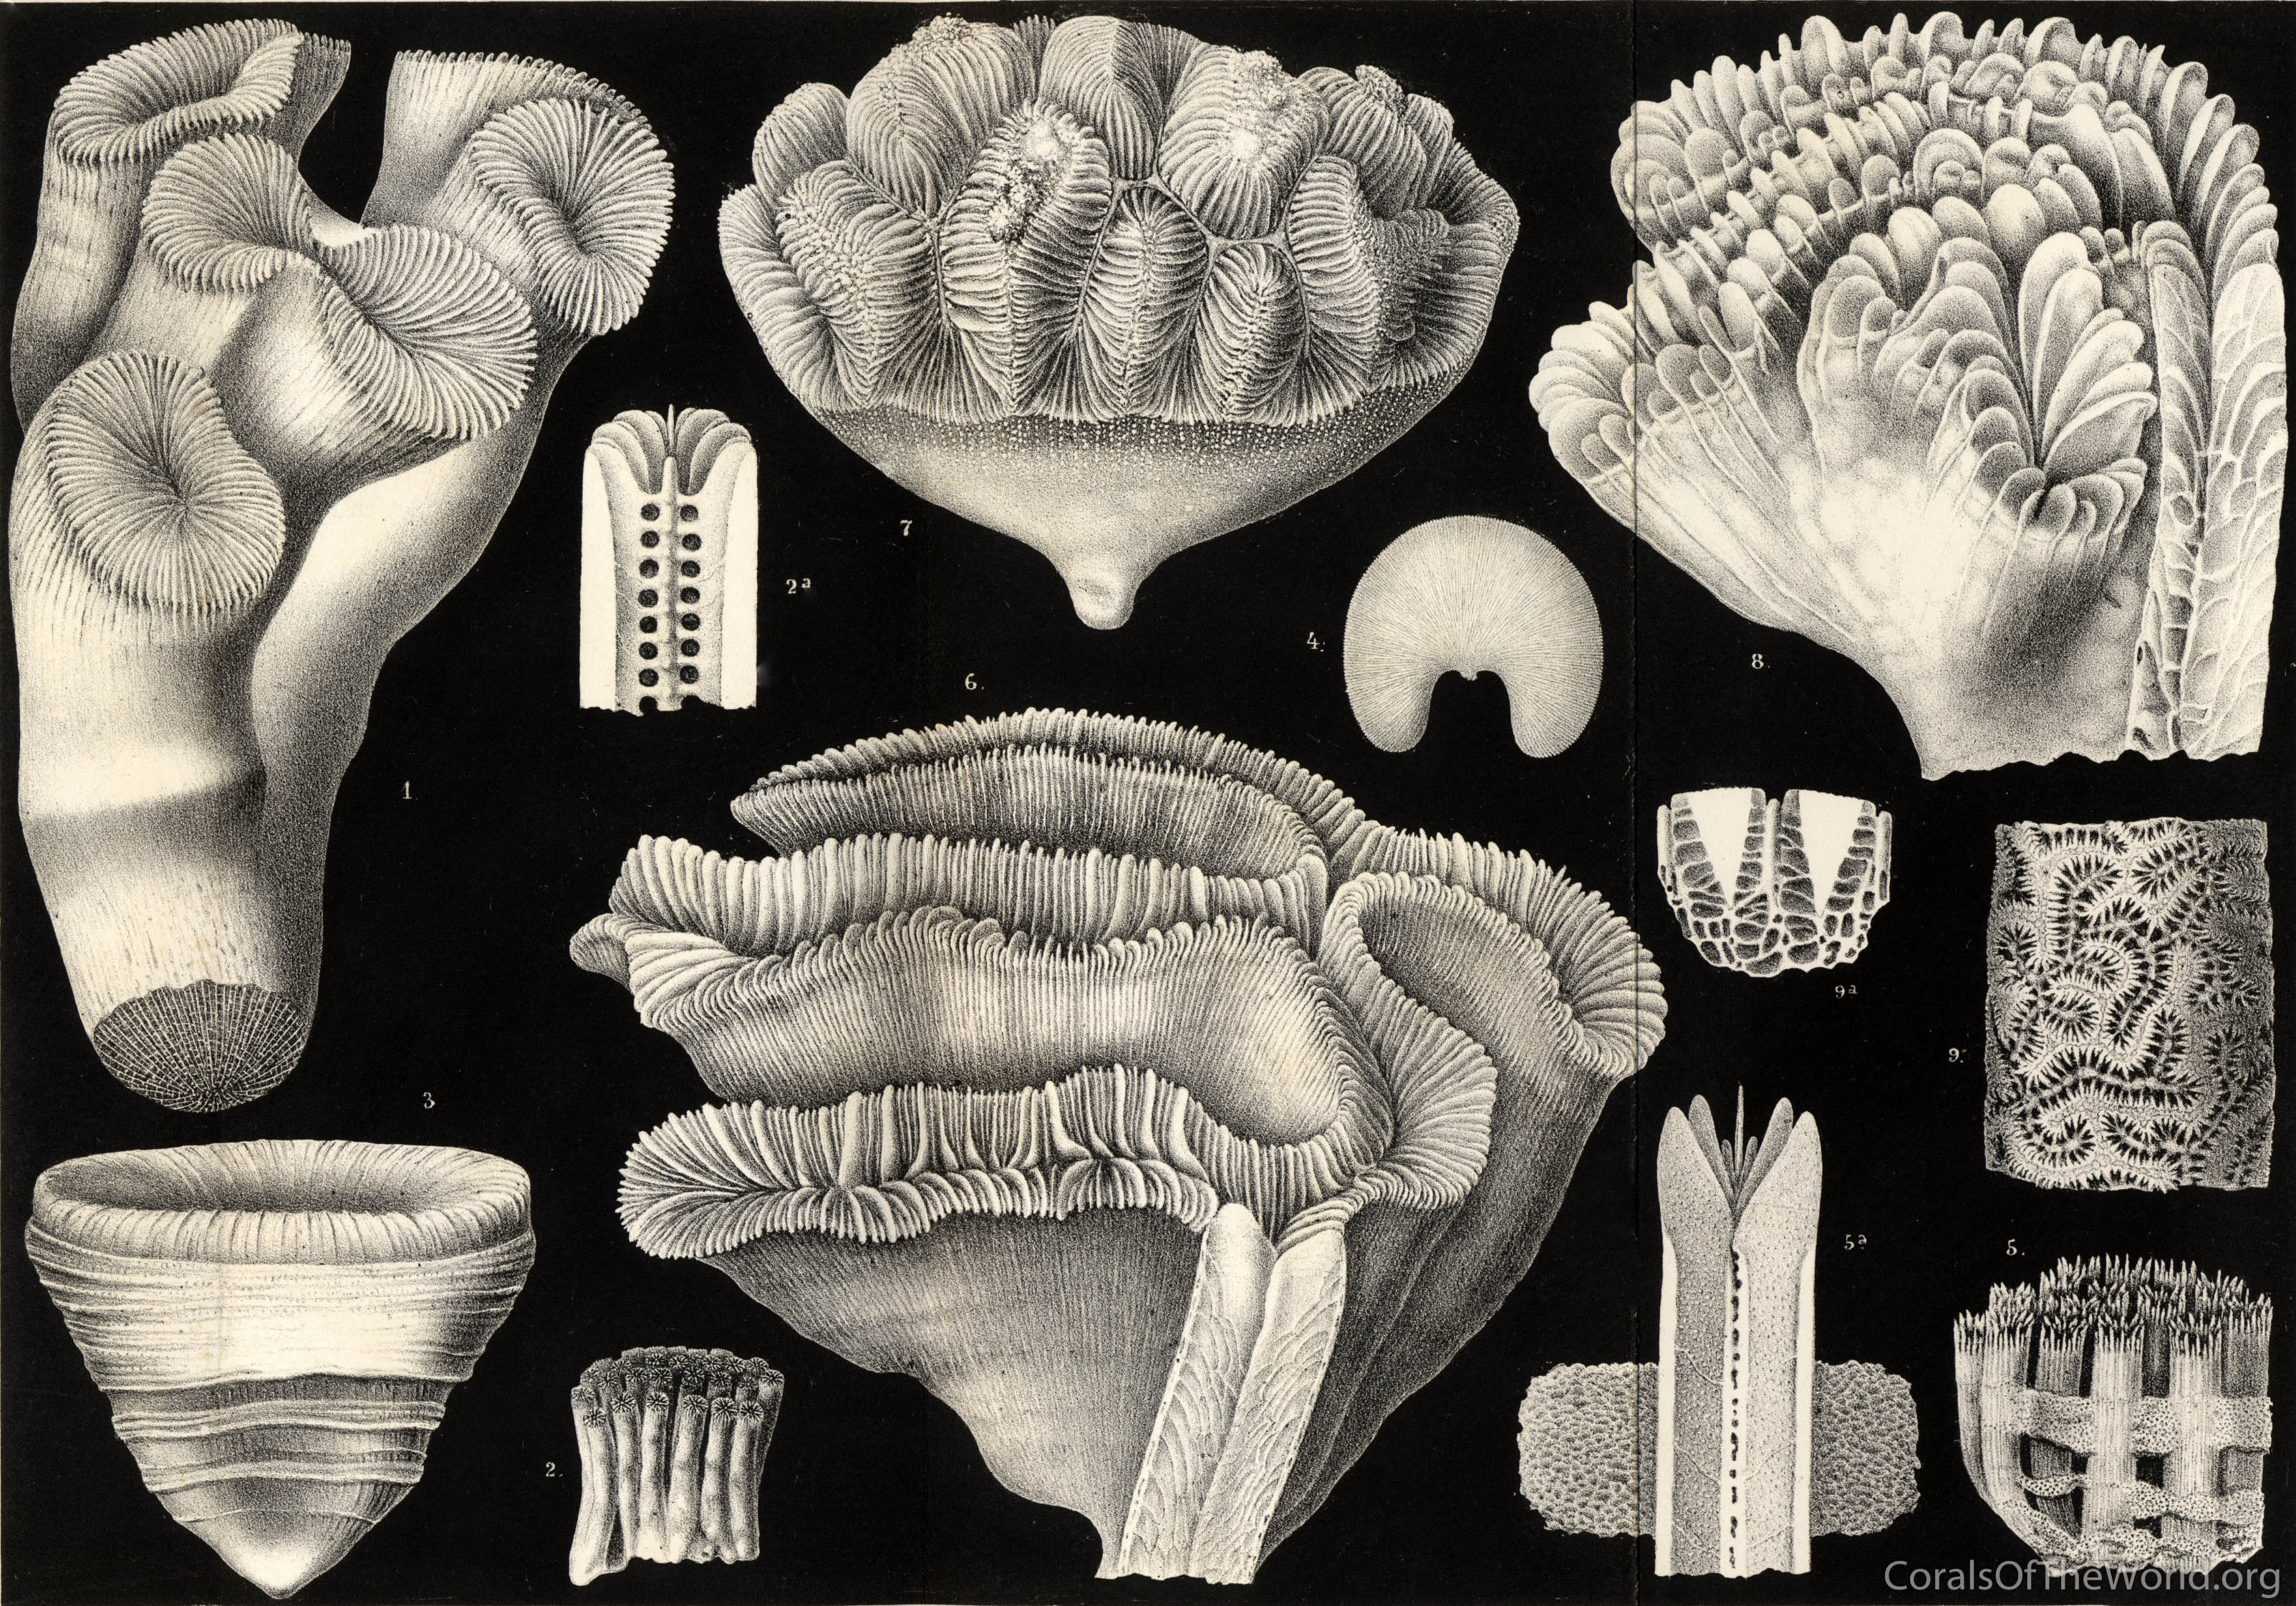 Quality artwork of corals